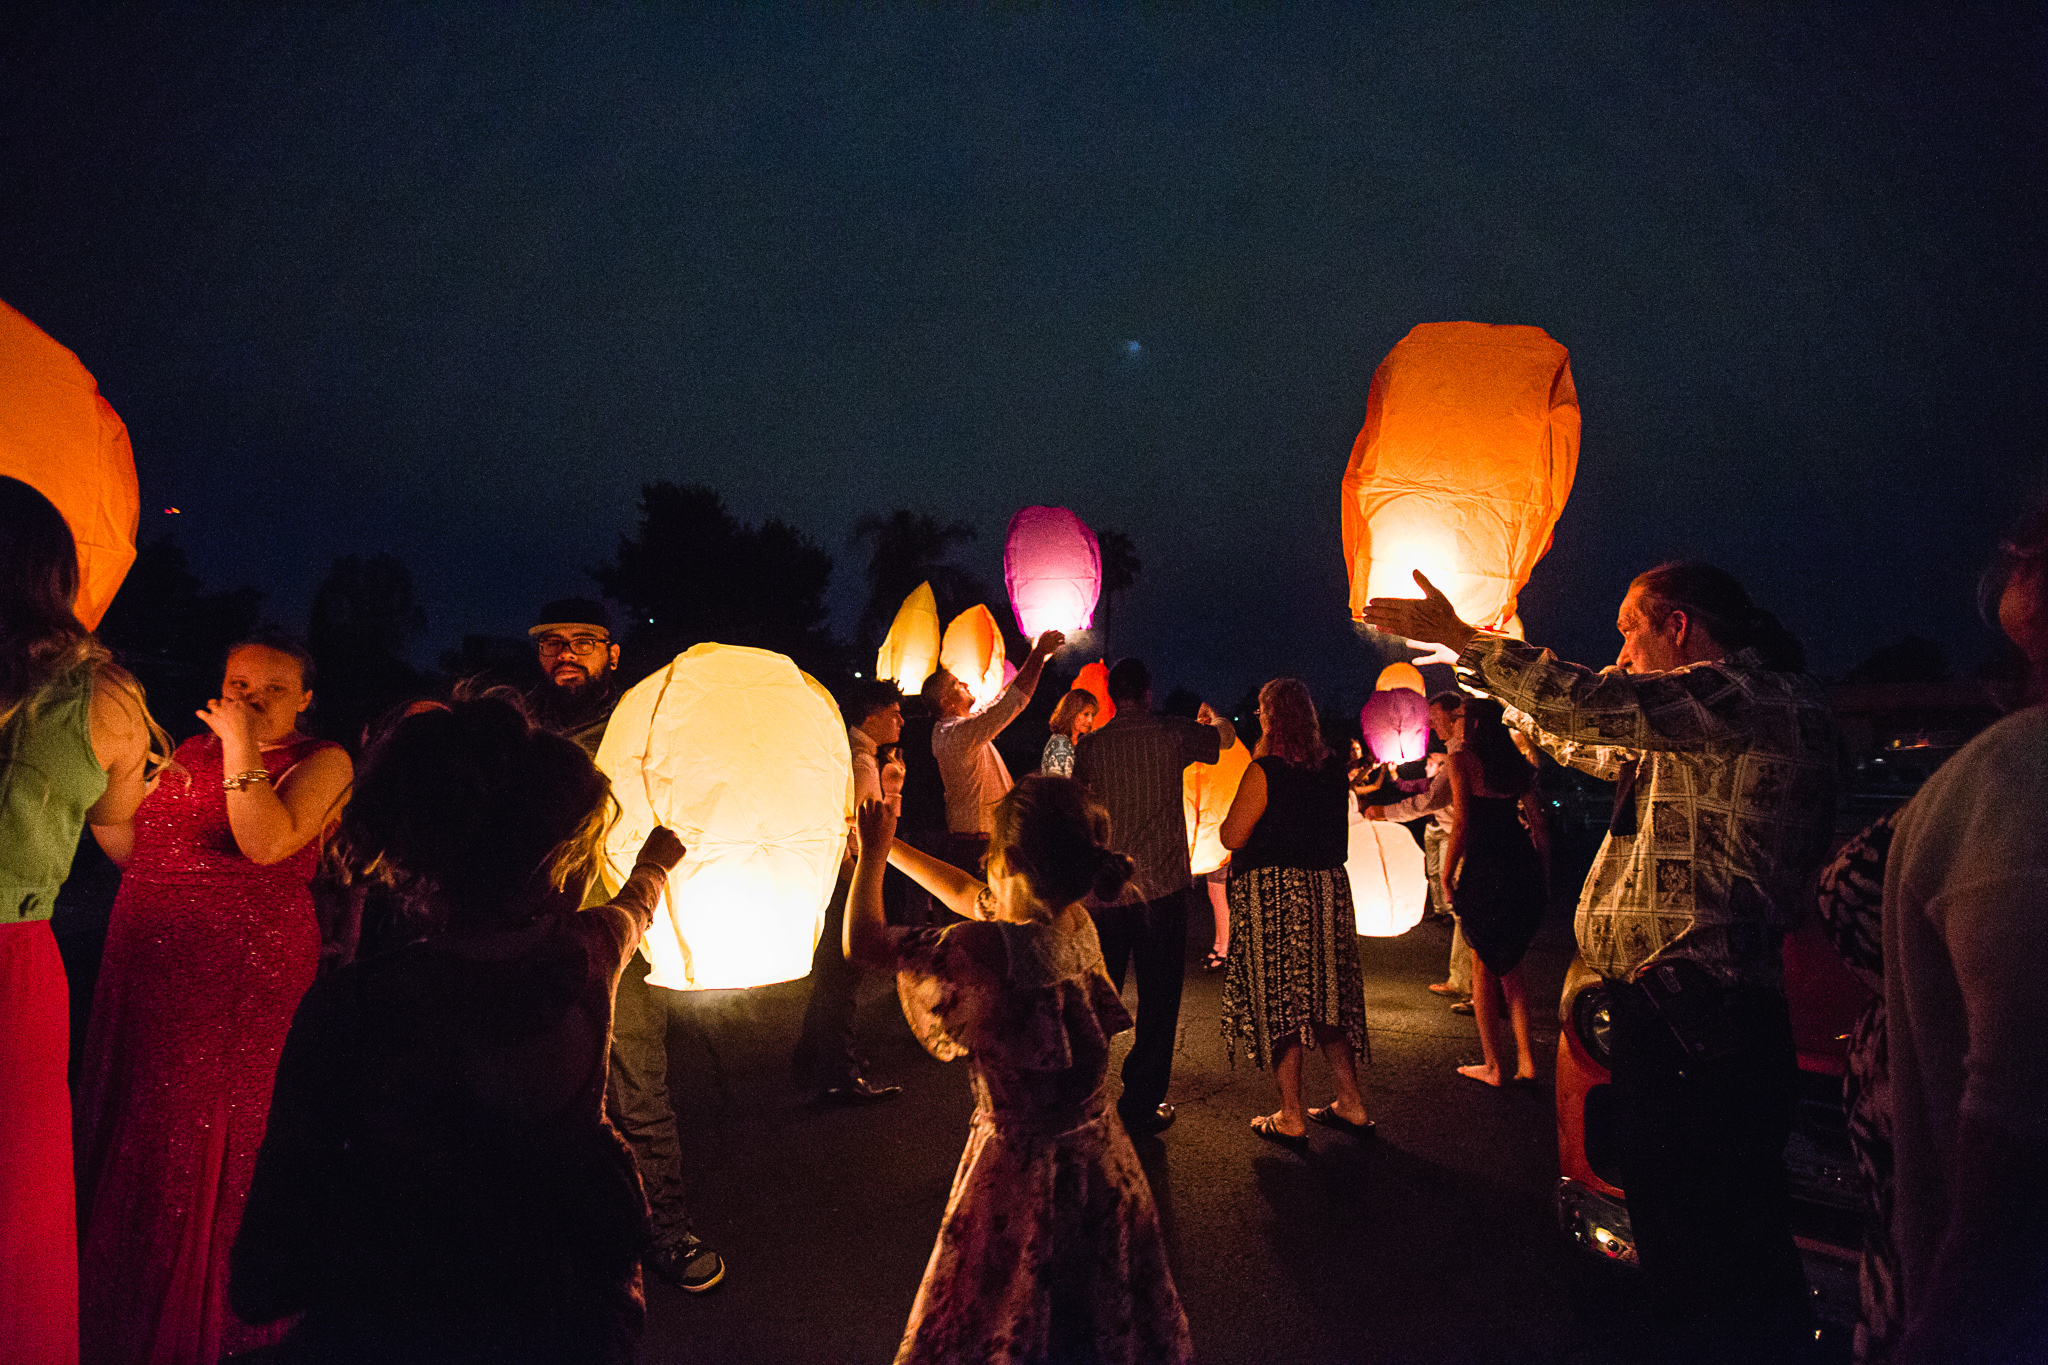 Guests light paper lanterns at wedding as part of their reception to remember lost loved ones by wedding photographer PMA Photography.